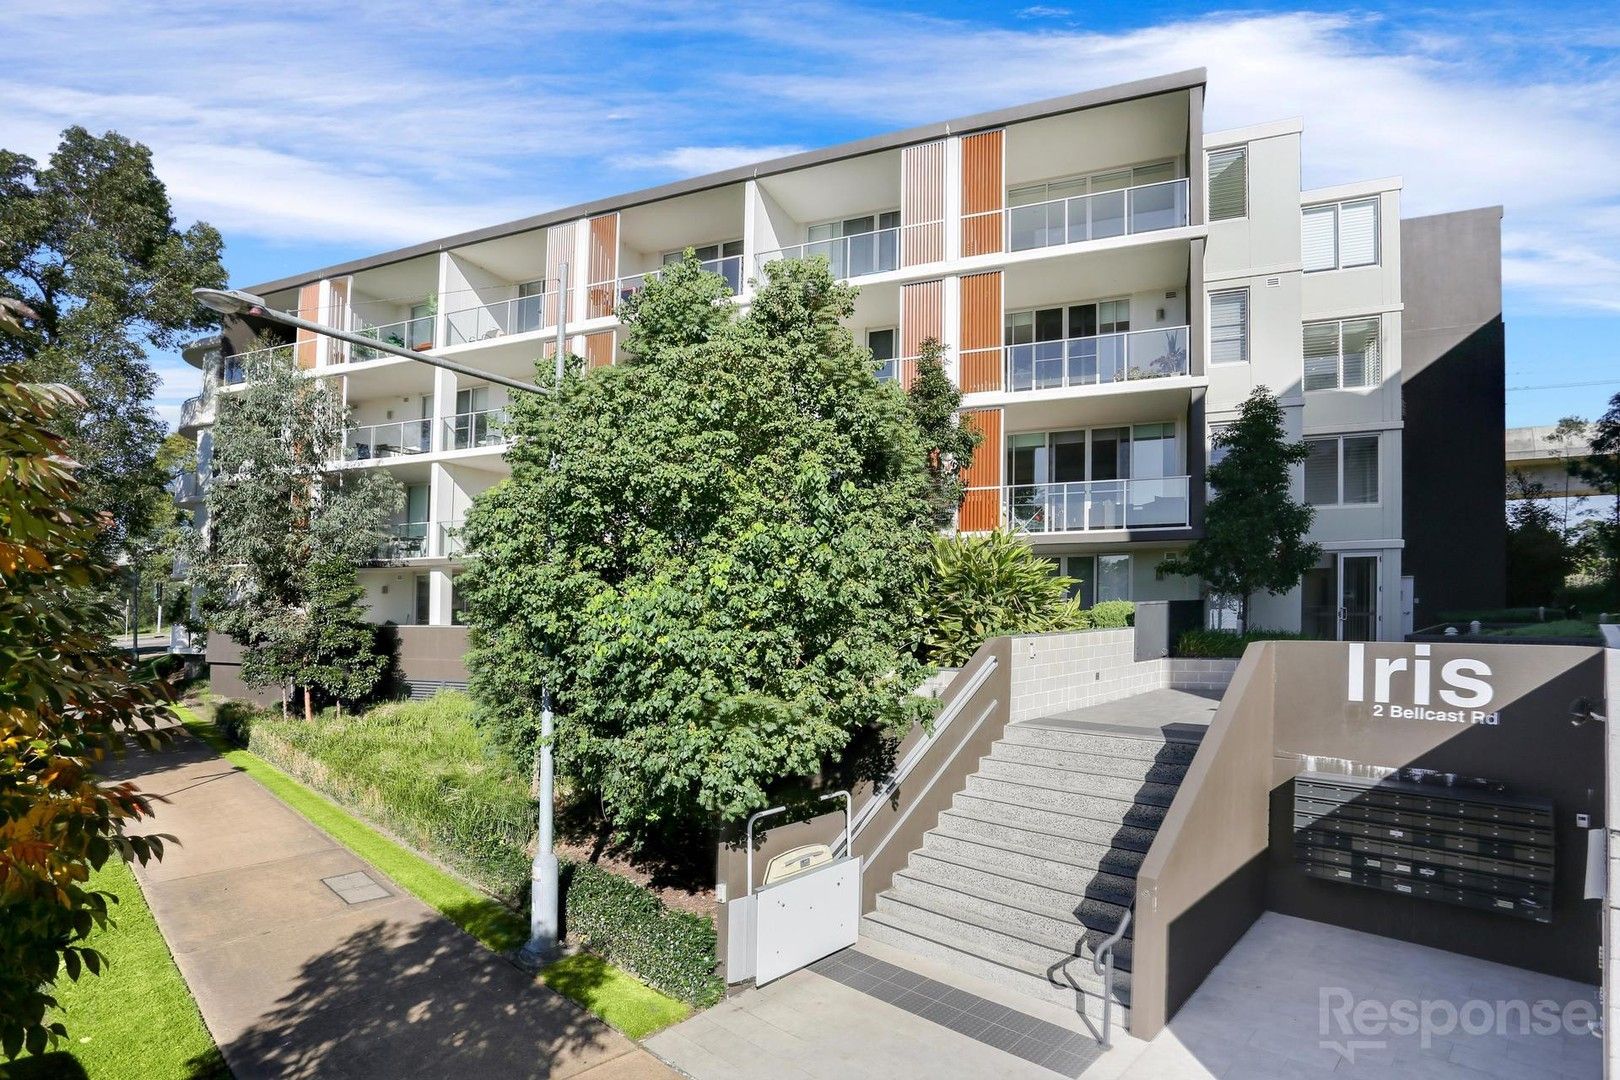 2 bedrooms Apartment / Unit / Flat in 10/2 Bellcast Road ROUSE HILL NSW, 2155